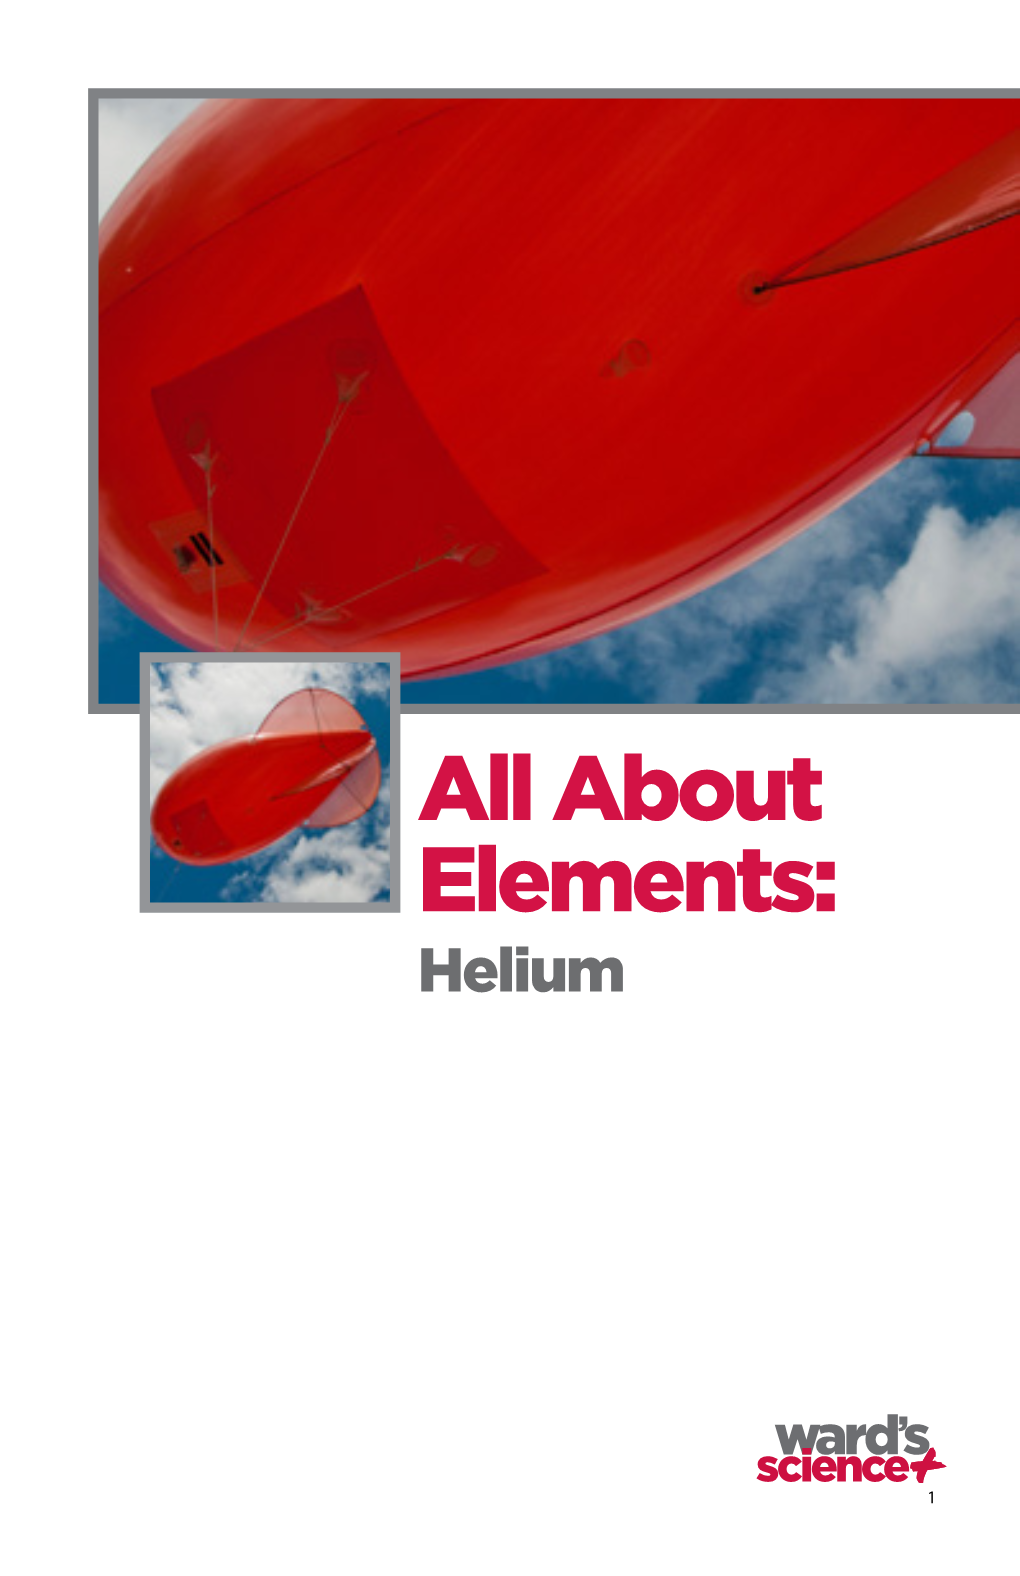 All About Elements: Helium